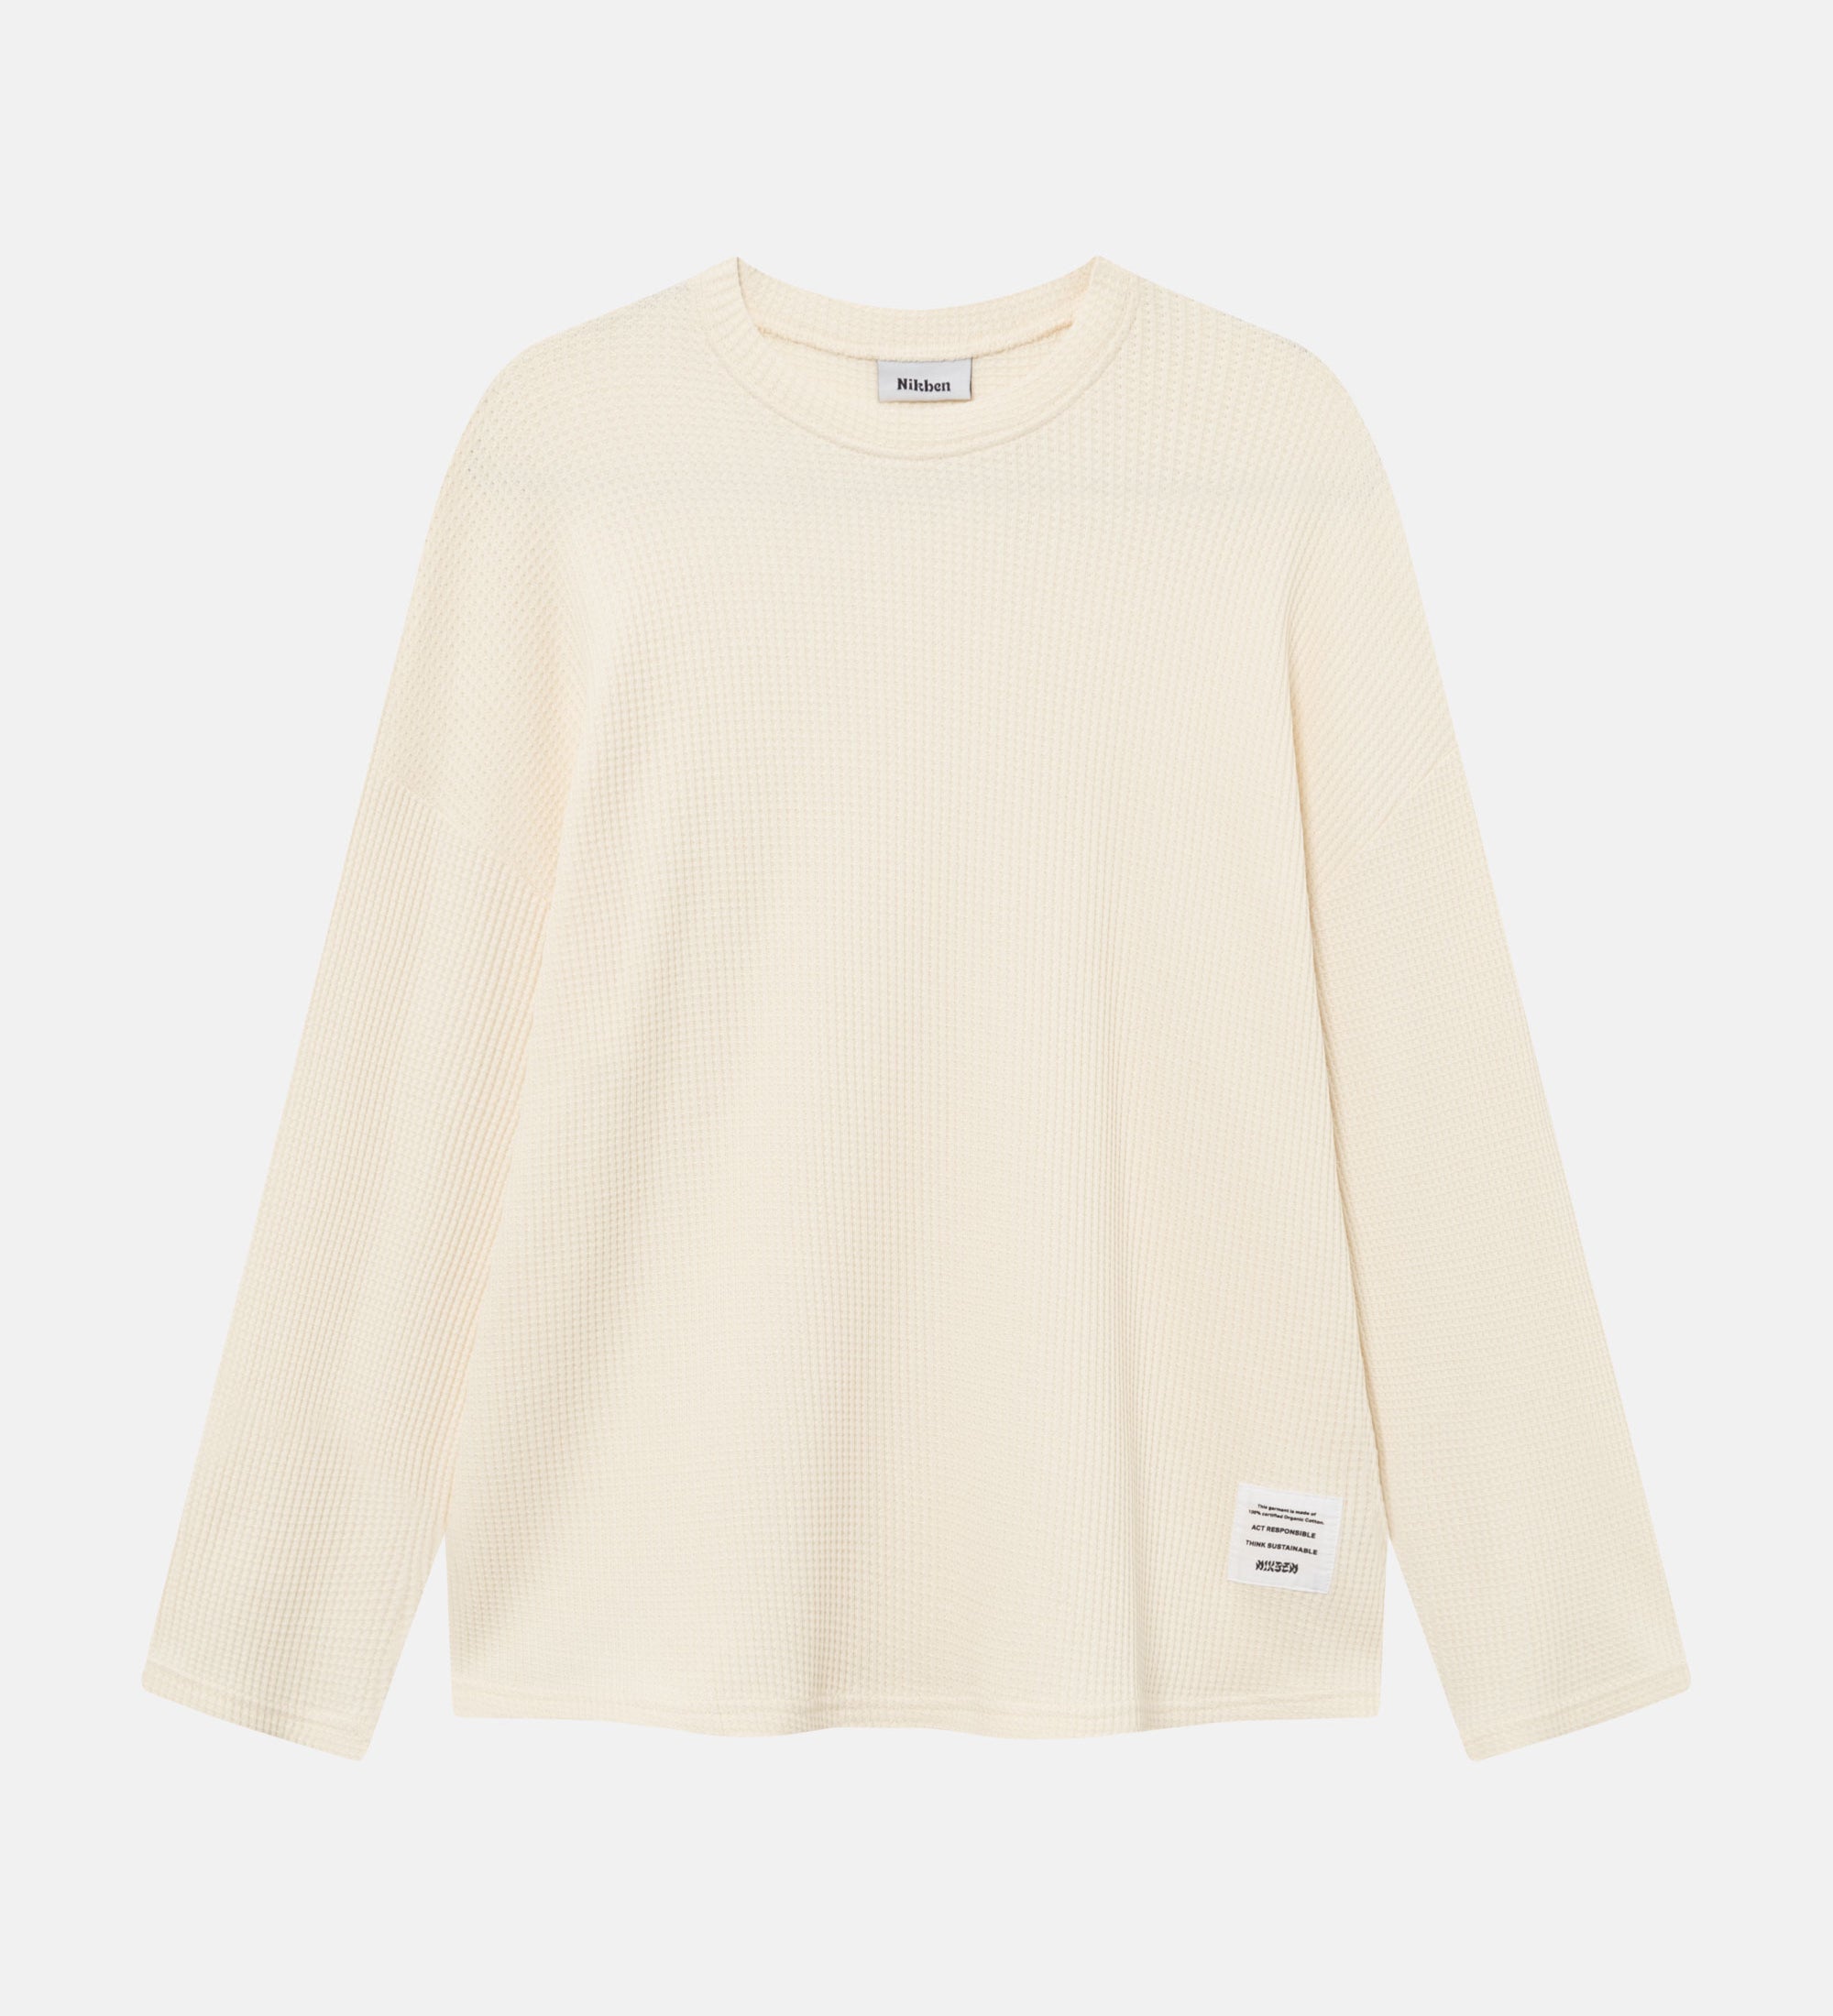 Off-white waffle-patterned sweatshirt with a stitched-on material label.